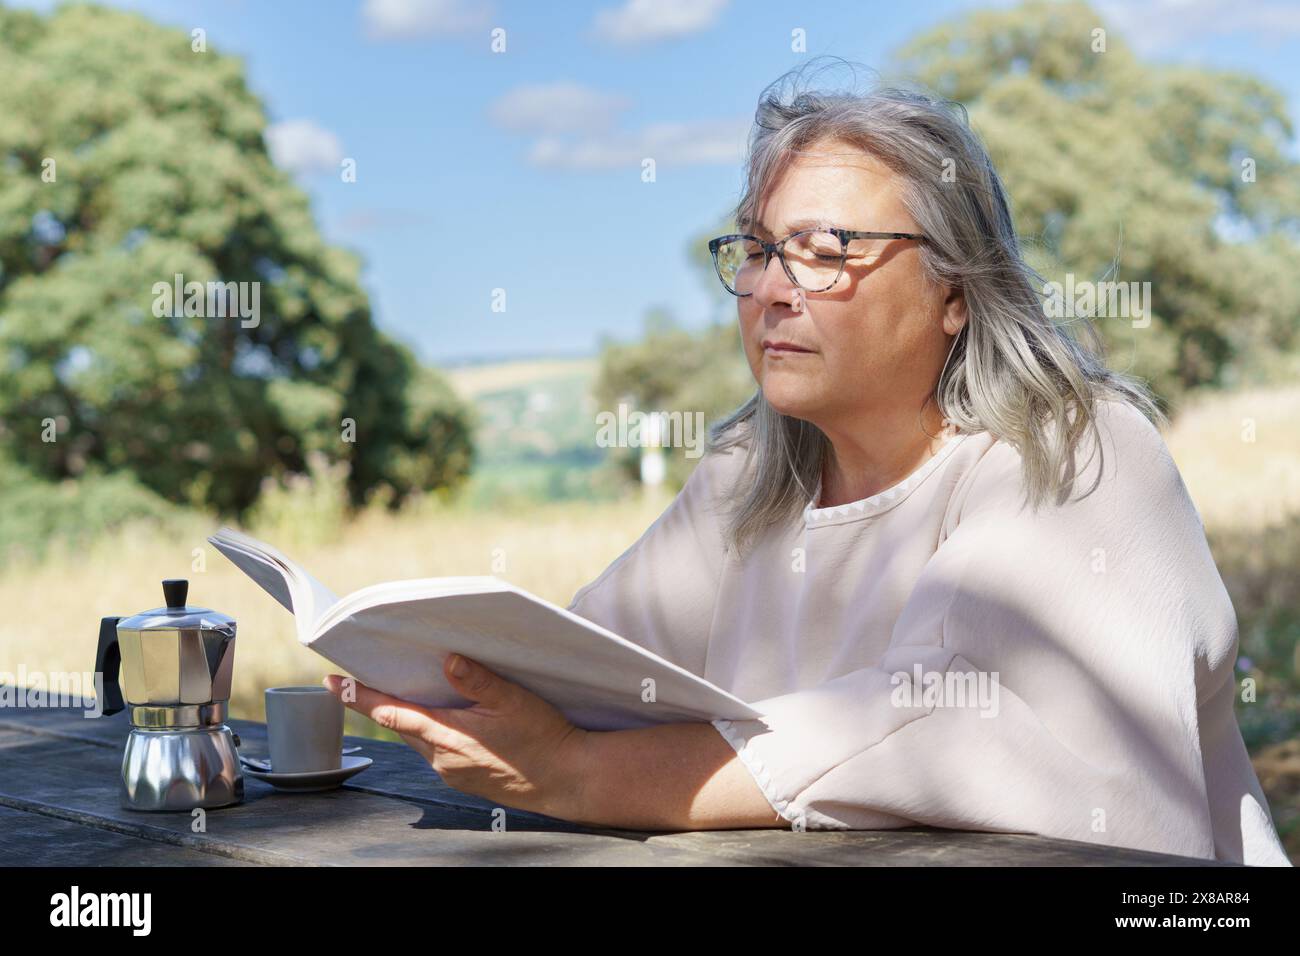 a woman reads a book at a table in a field while drinking a cup of coffee in the background trees and a blue sky with clouds. Stock Photo